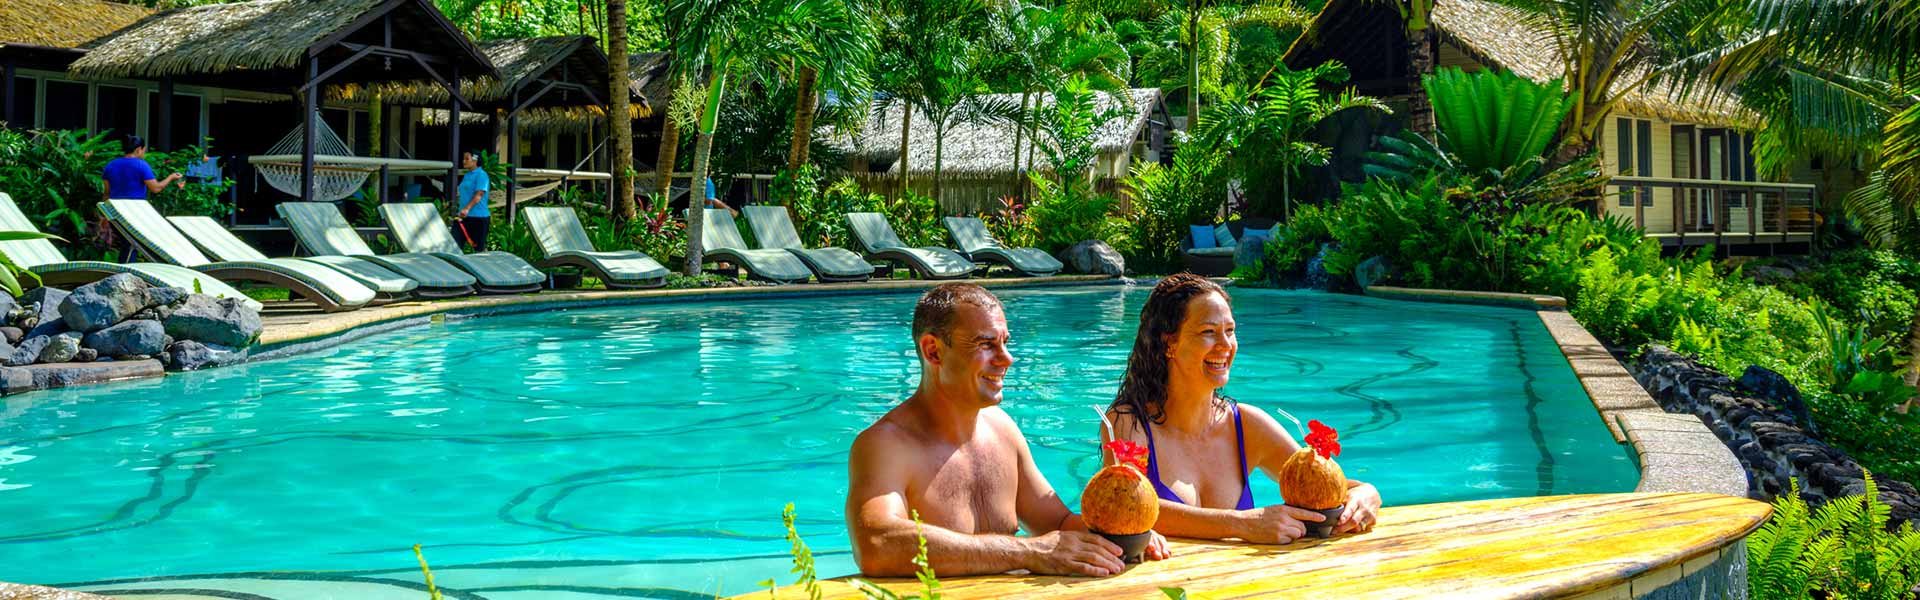 5 Nights in Samoa with Flights, All Meals, Transfers & More!